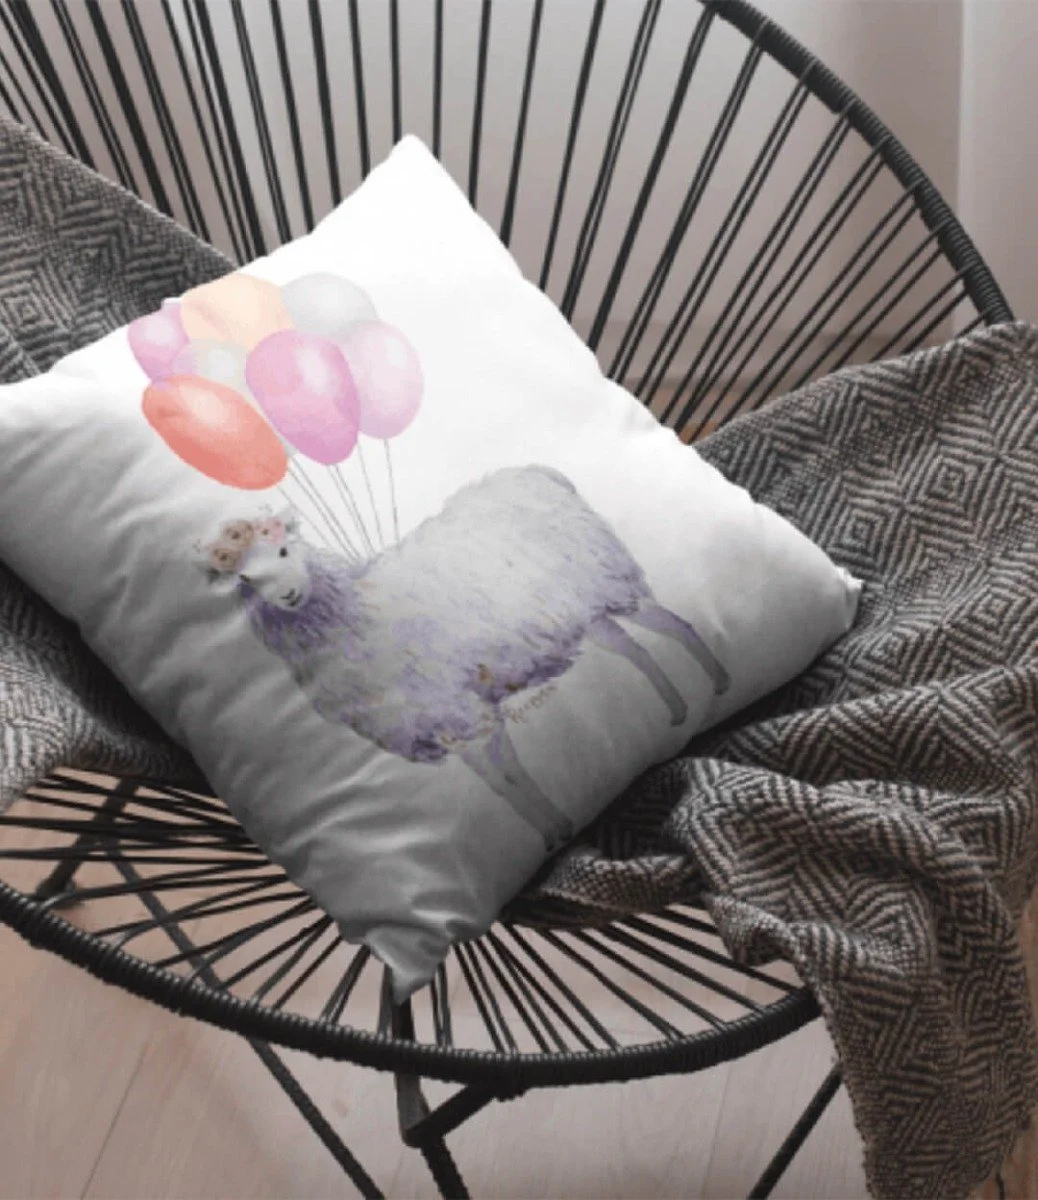 Eid Cushion With Colorful Balloons and Lamb Design